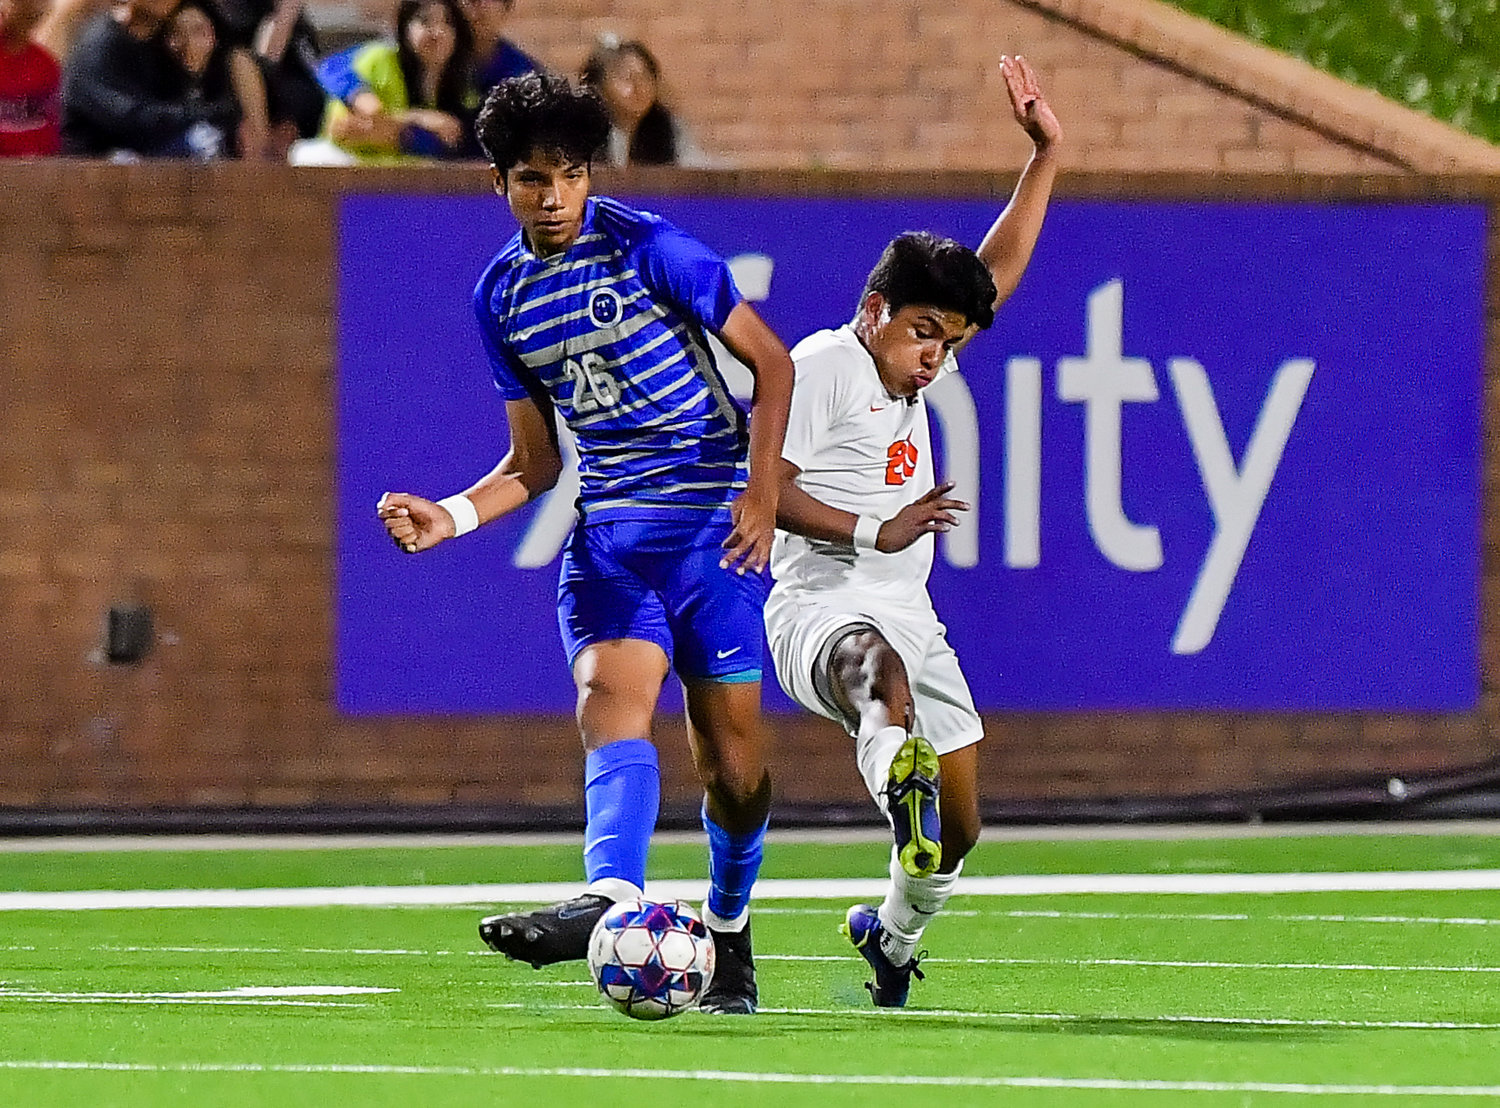 April 1, 2022: Katy Taylors Erick Arellano #26 and Seven Lakes Alexis Matute #20 go for the ball during Regional Quarterfinal soccer playoff, Seven Lakes vs Katy Taylor at Rhode Stadium. (Photo by Mark Goodman / Katy Times)